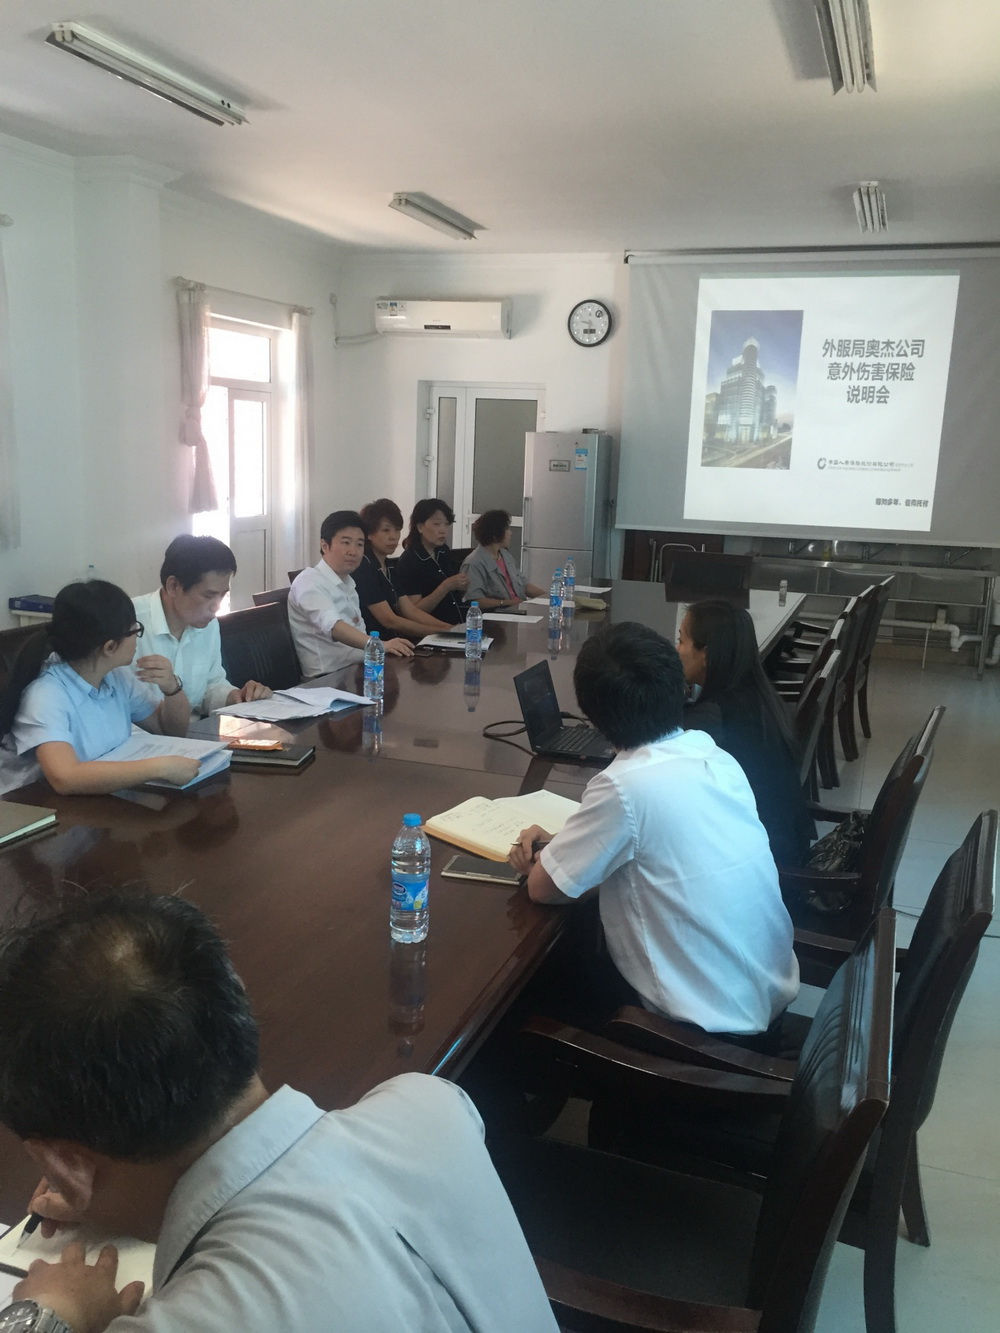 The Agency Holds Communication Meeting for Aojie on Personal Casualty Insurance